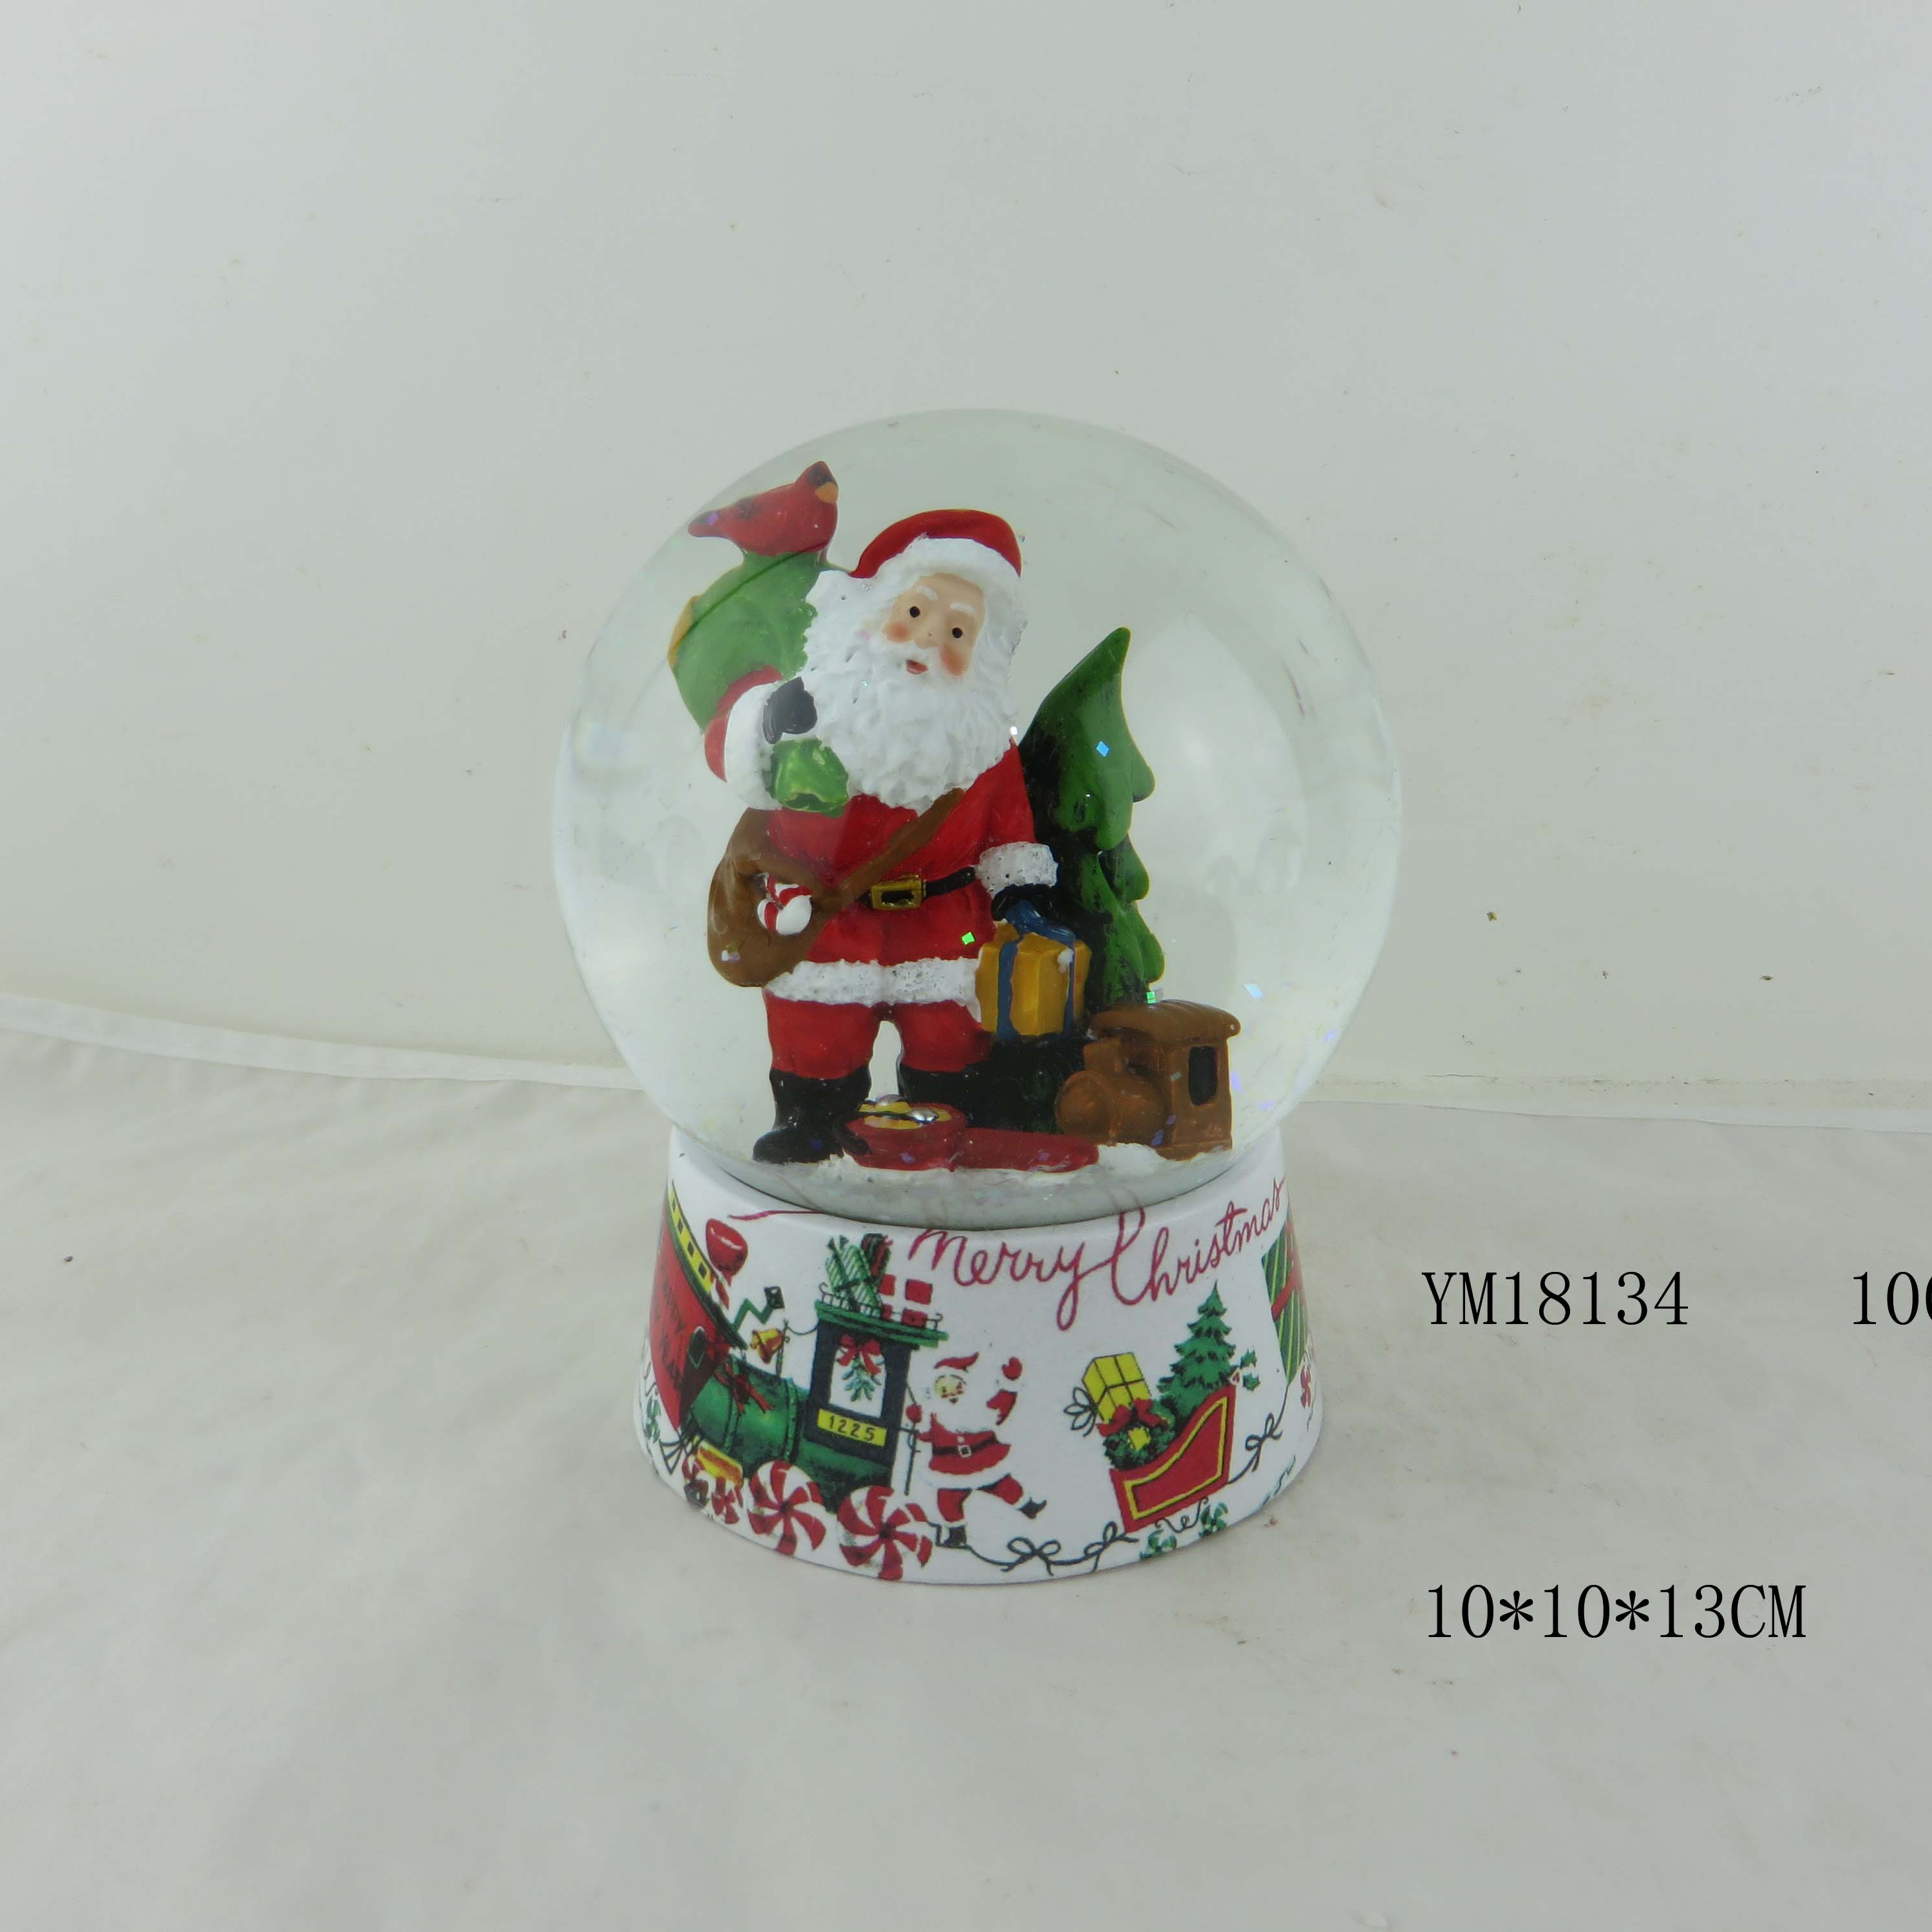 The new 2018 santa claus model water globe xmas decoration for home